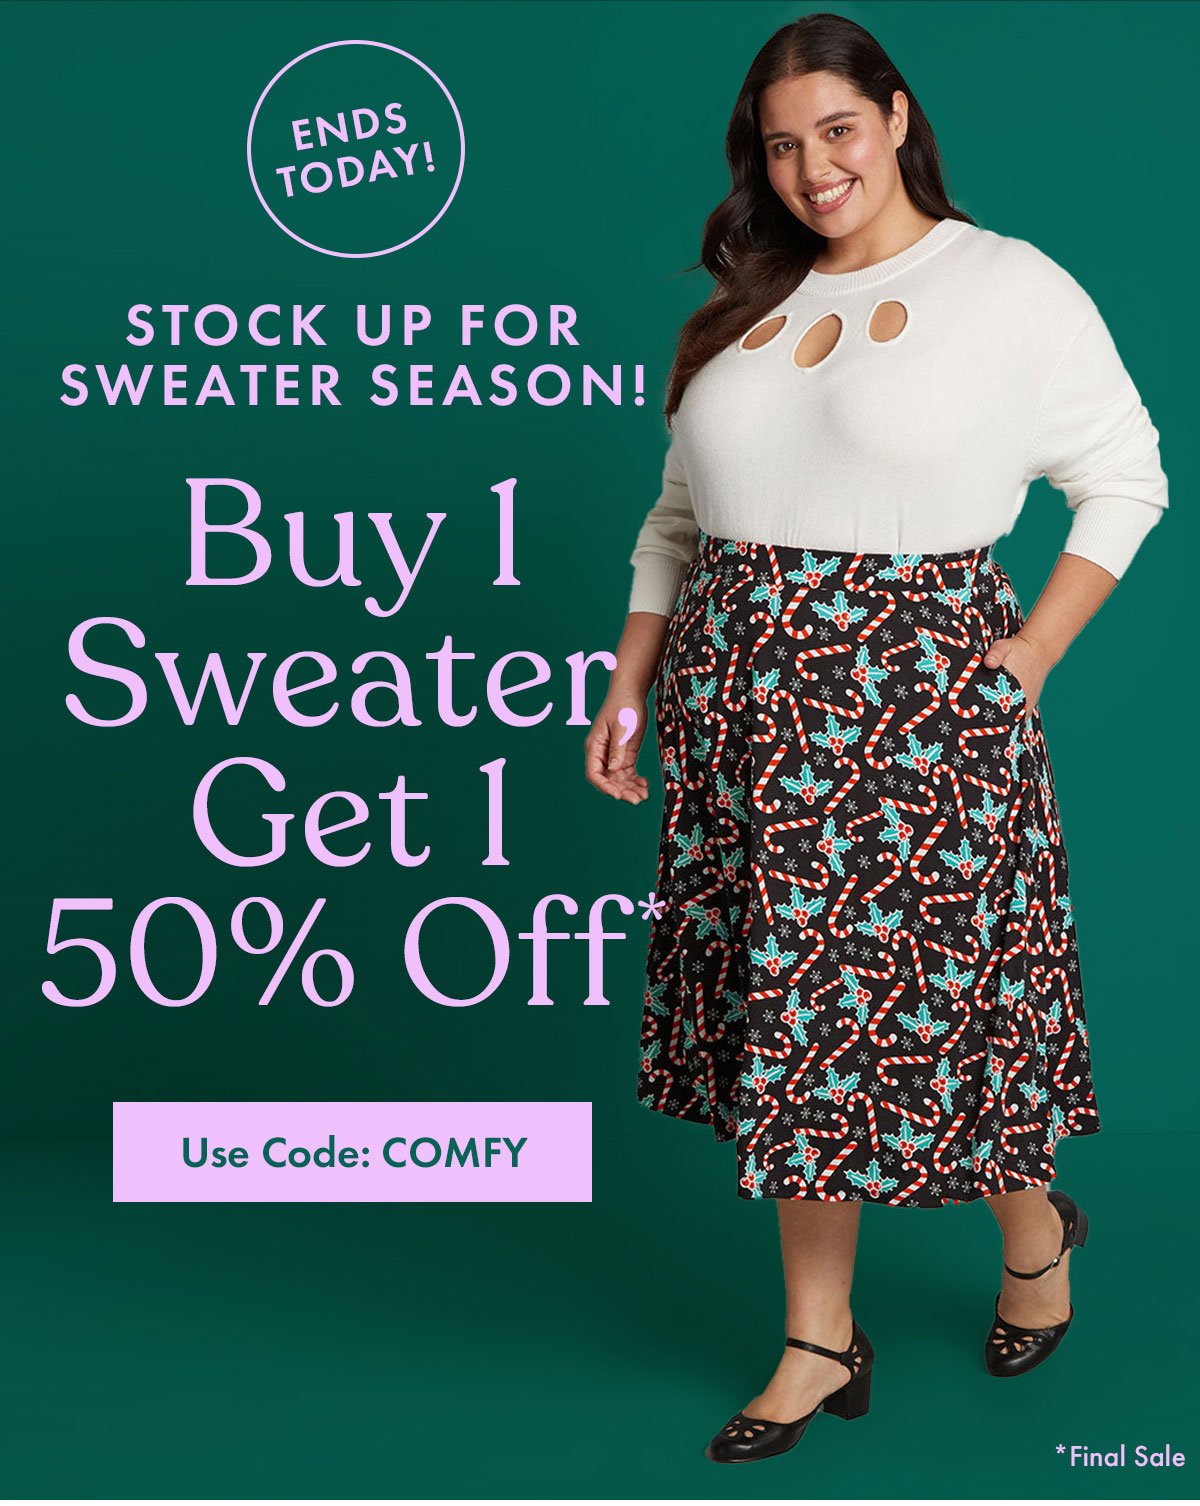 Stock Up For Sweater Season! | Buy 1 Sweater, Get 1 50% Off